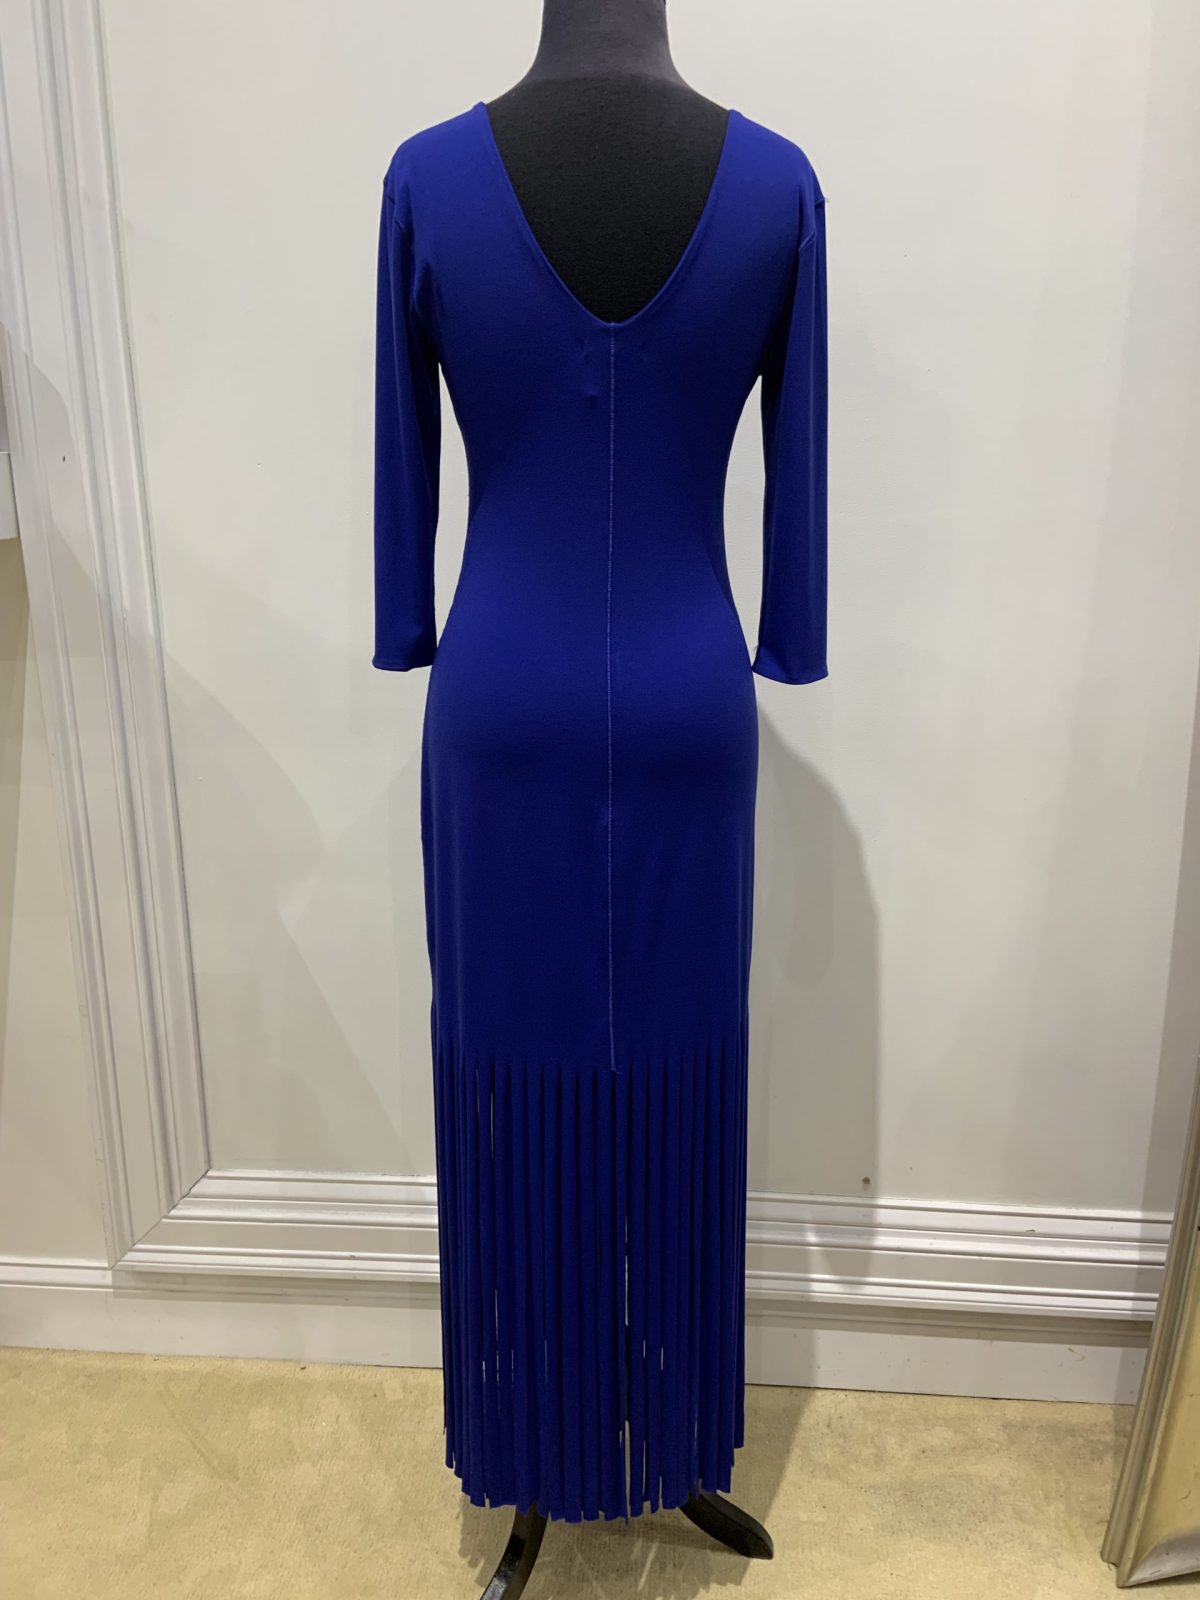 Eva Varro D12751D Royal Blue 3/4 Fringe Dress with 3/4 Length Sleeves | Ooh Ooh Shoes women's clothing and shoe boutique located in Naples and Mashpee